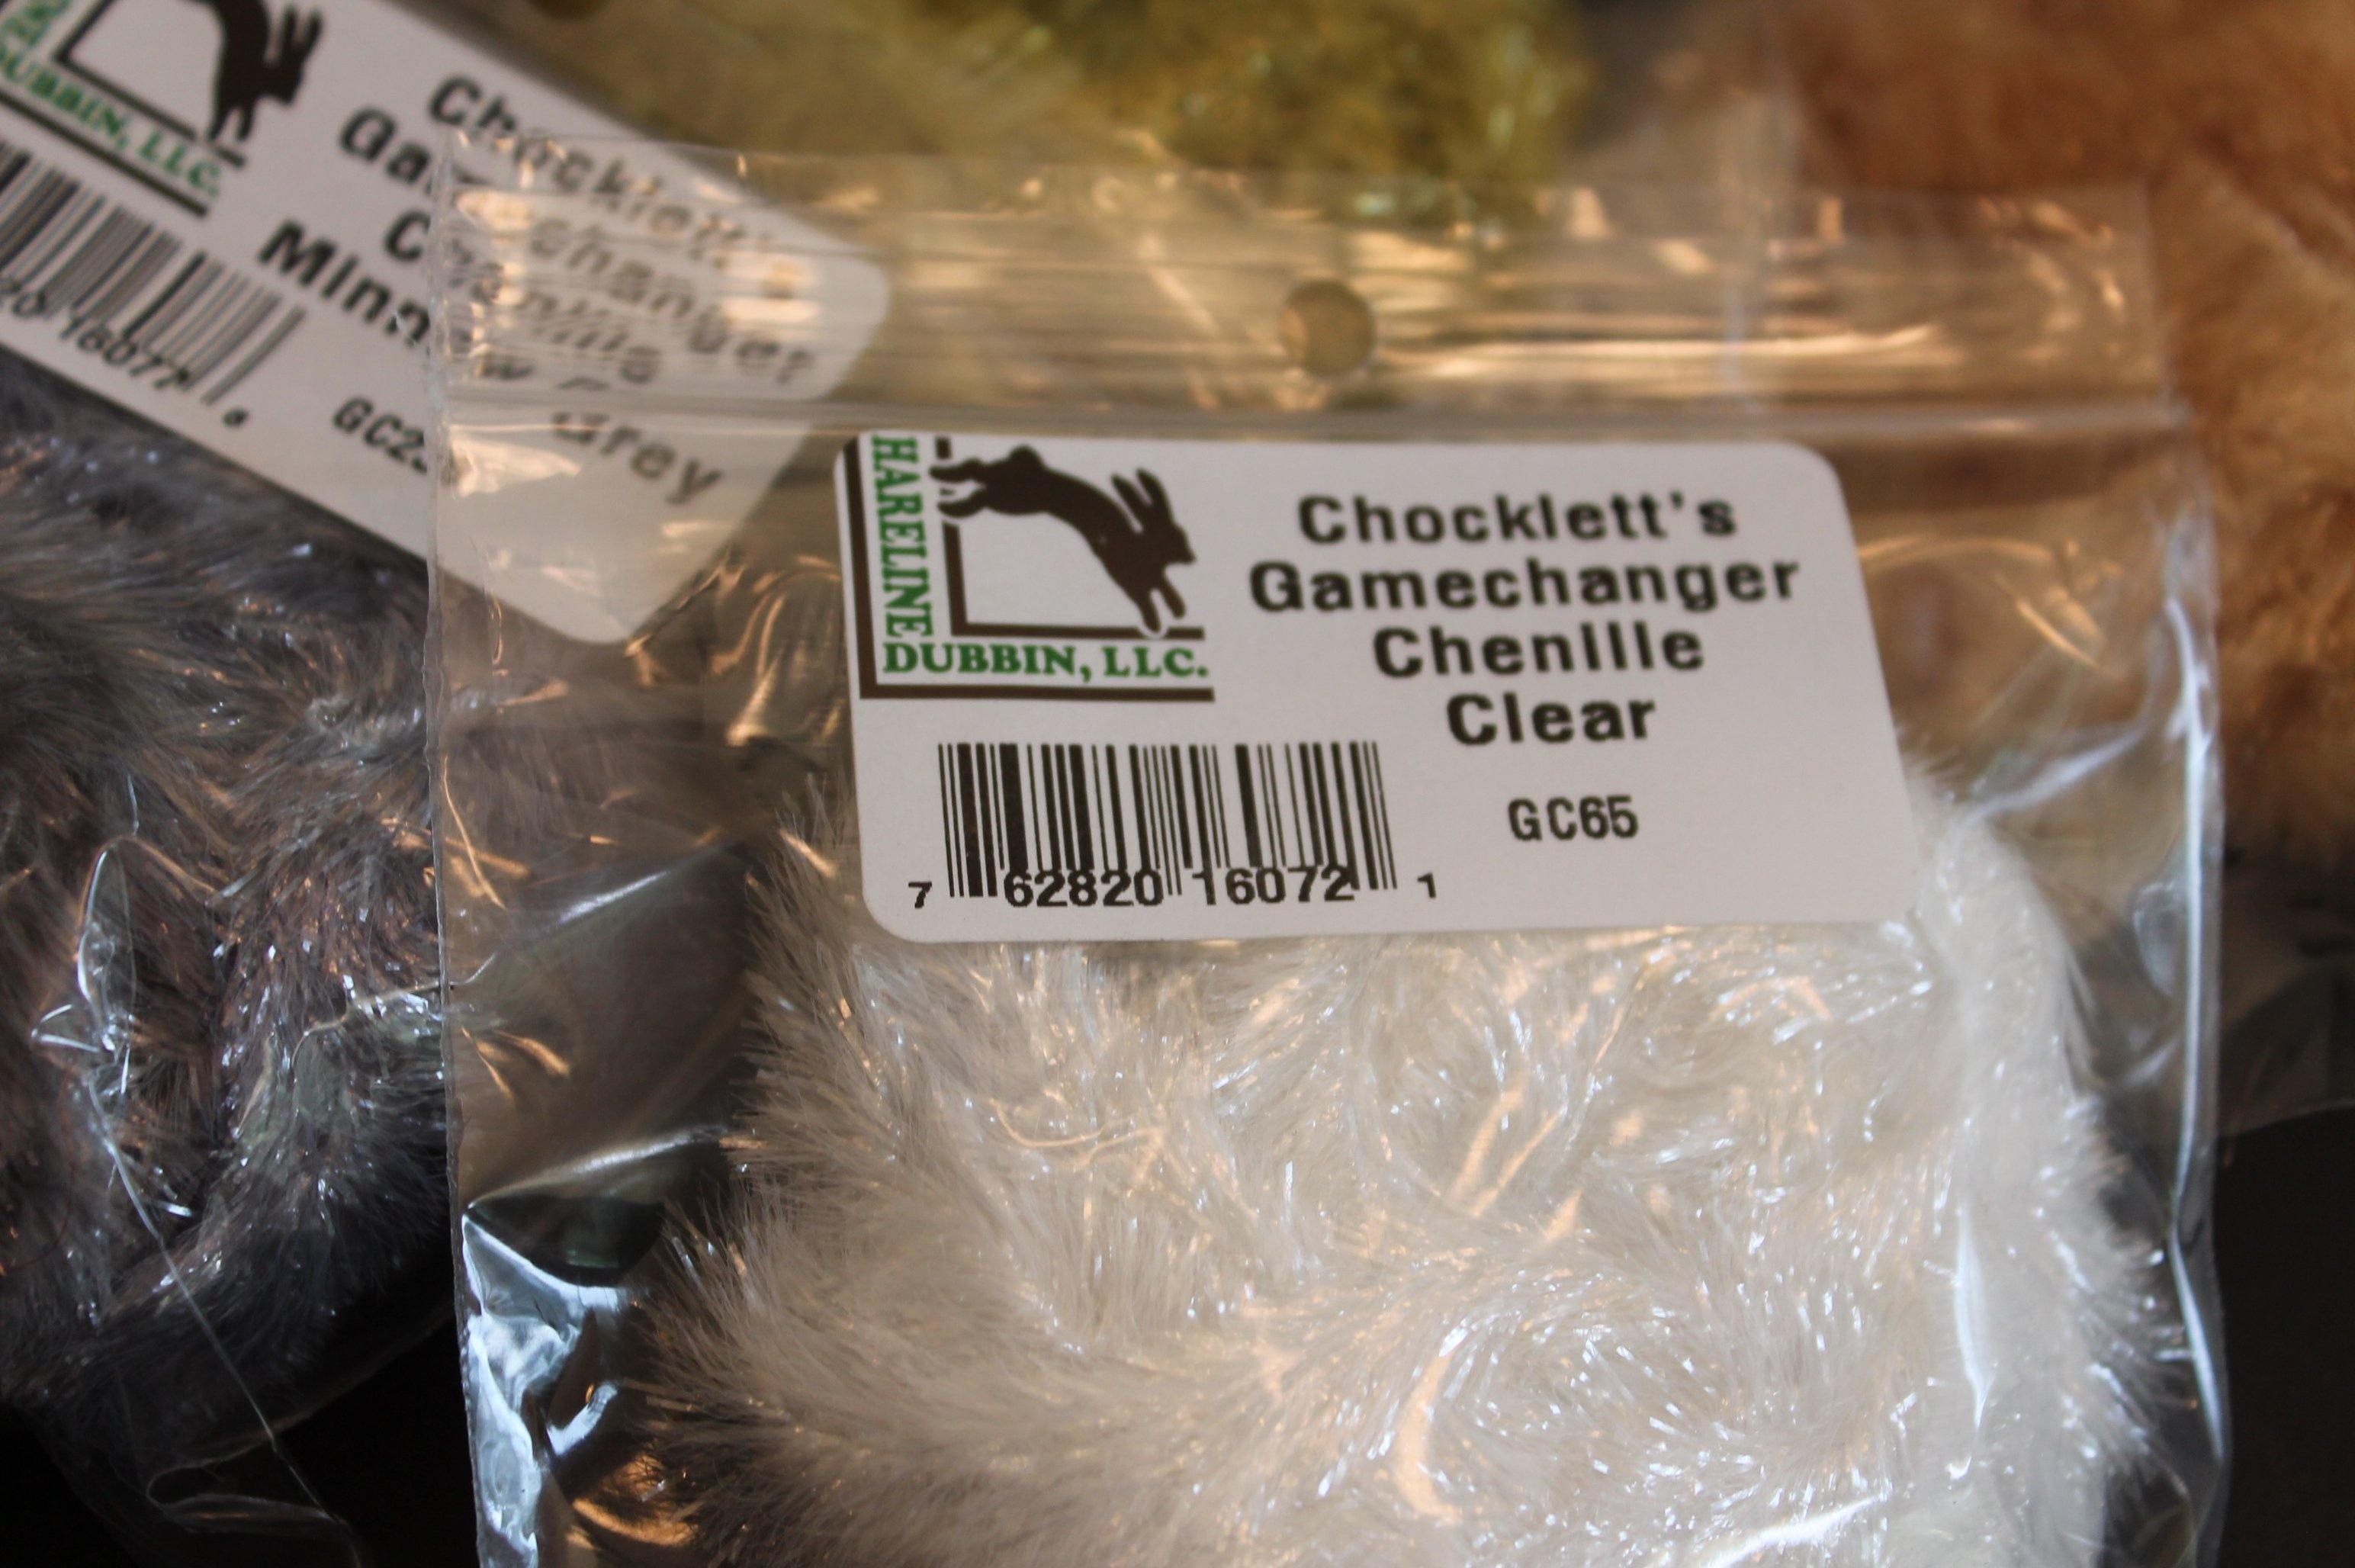 Chocklett's Game Changer Chenille - Big T Fly Fishing